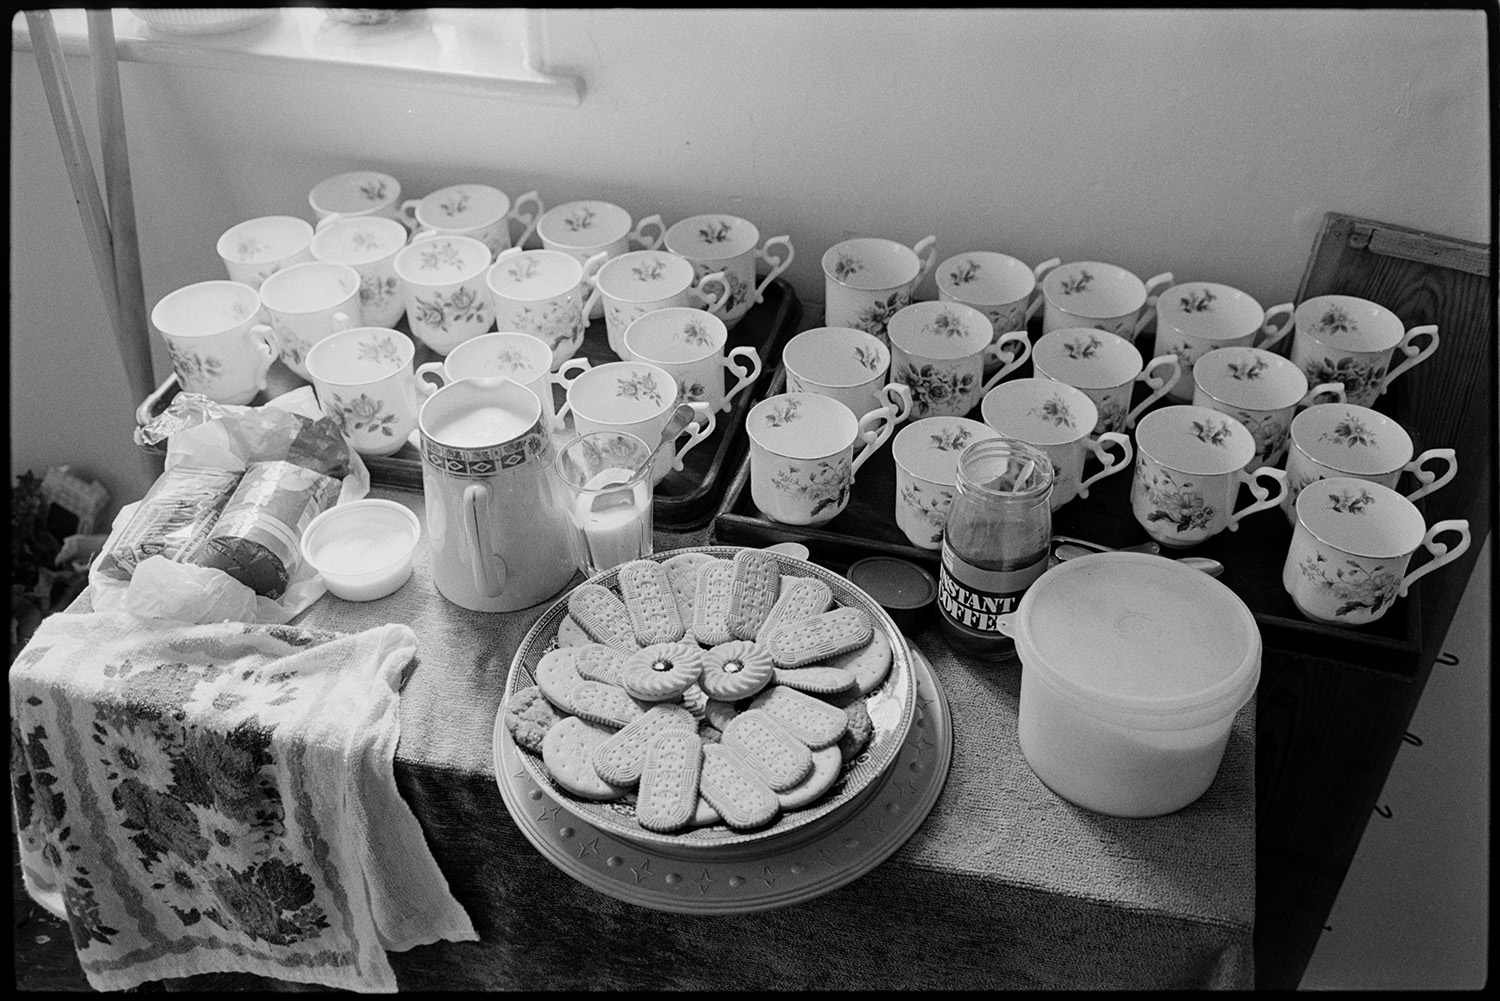 Baptist Chapel flower festival Minister playing organ, harmonium, mugs and biscuits, teas.
[Table on which are cups are laid out on trays with milk, sugar in a bowl, a jar of instant coffee, biscuits arranged on a plate and a floral teacloth, at the Dolton Baptist Chapel flower festival.]